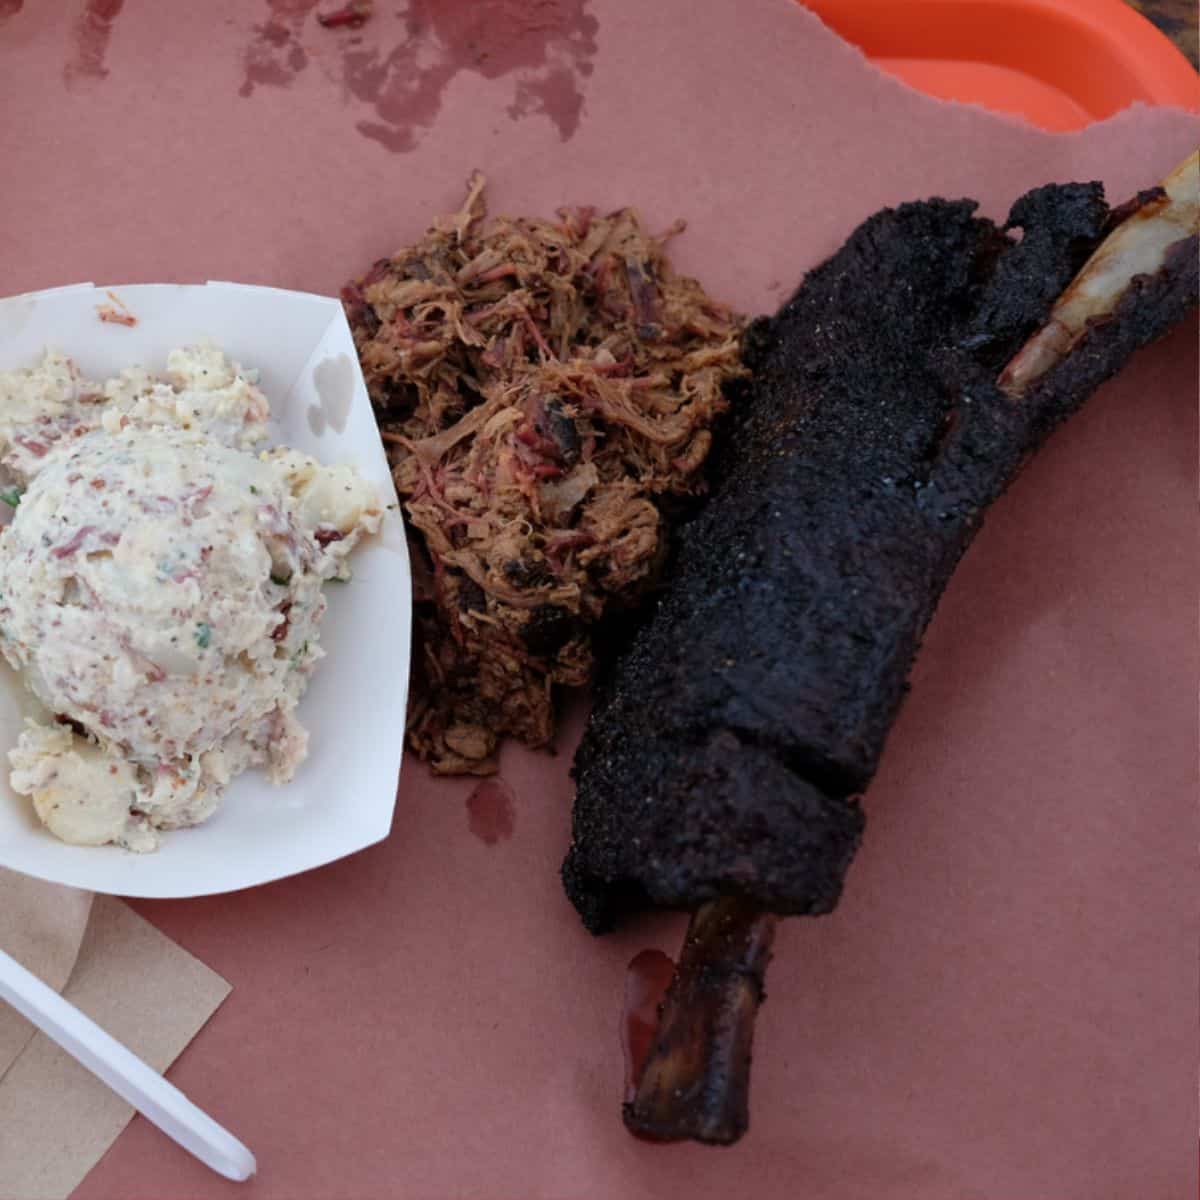 Lunch at la Barbecue: Beef rib, chopped brisket, potato salad with bacon, pickles